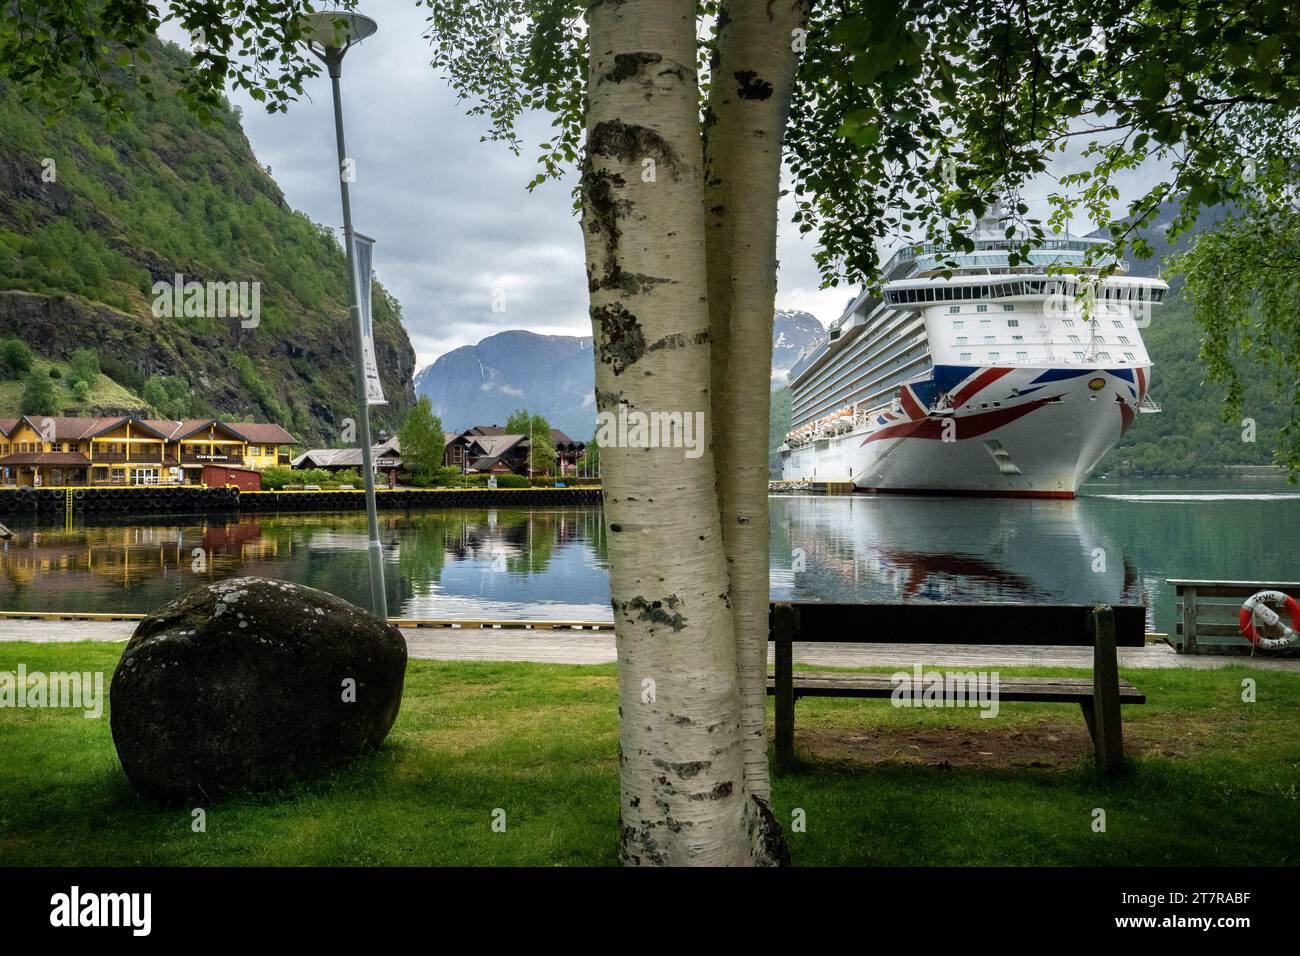 A cruise ship in the port of Flam. Stock Photo